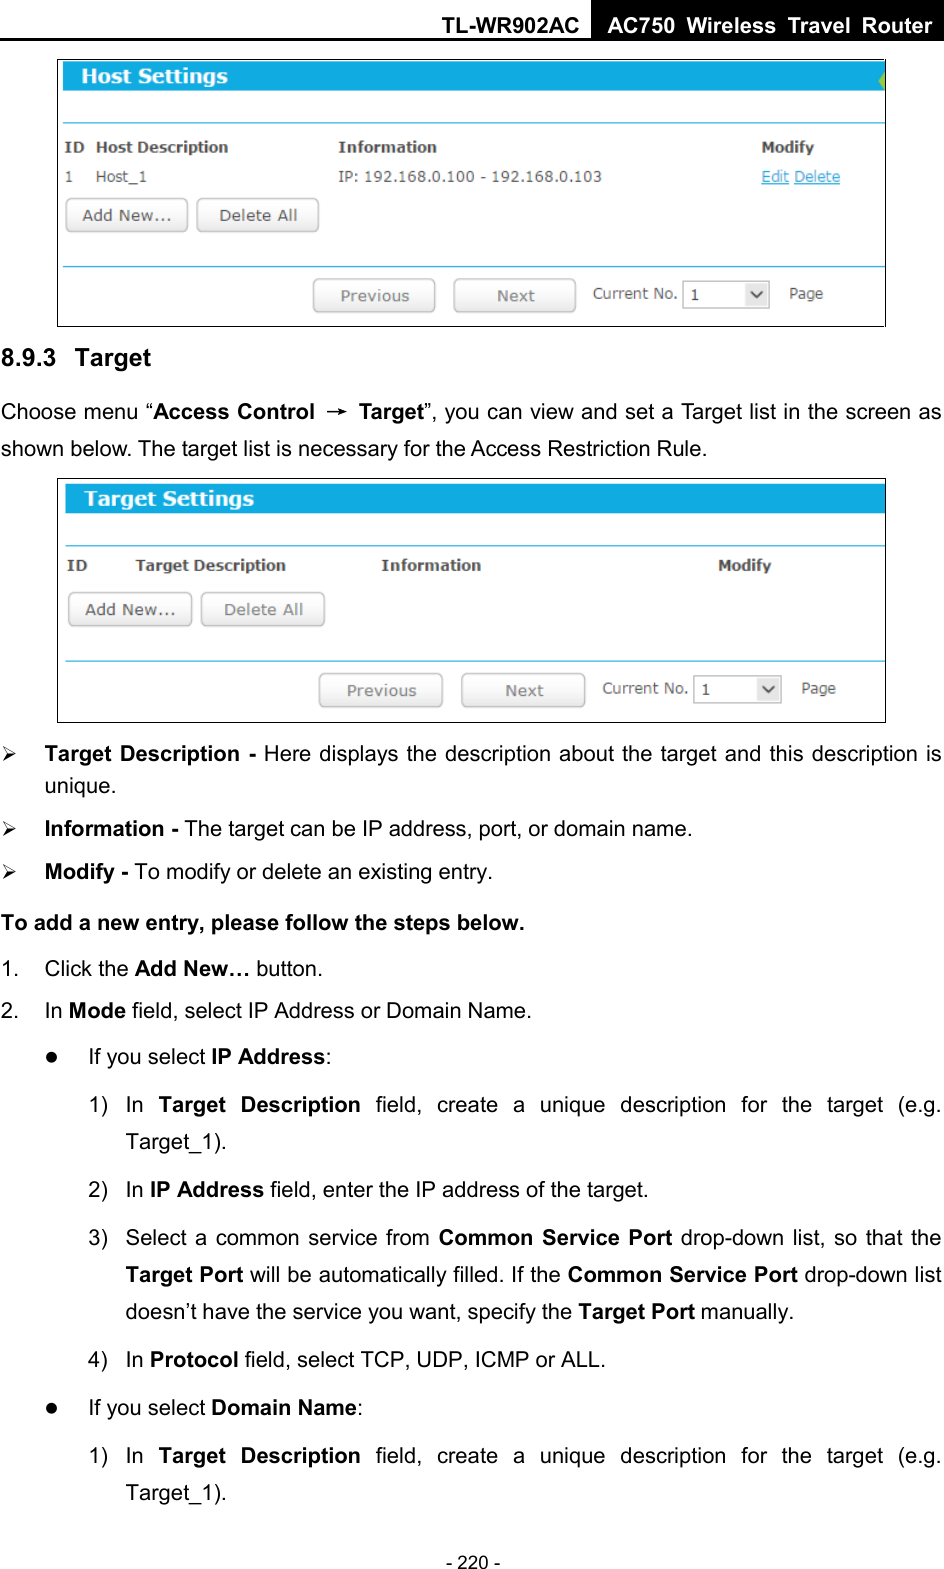 TL-WR902AC AC750  Wireless Travel Router  - 220 -  8.9.3  Target Choose menu “Access Control → Target”, you can view and set a Target list in the screen as shown below. The target list is necessary for the Access Restriction Rule.   Target Description - Here displays the description about the target and this description is unique.    Information - The target can be IP address, port, or domain name.    Modify - To modify or delete an existing entry.   To add a new entry, please follow the steps below. 1.  Click the Add New… button. 2. In Mode field, select IP Address or Domain Name.  If you select IP Address: 1)  In  Target Description field, create a unique description for the target (e.g. Target_1). 2)  In IP Address field, enter the IP address of the target. 3) Select a common service from Common Service Port drop-down list, so that the Target Port will be automatically filled. If the Common Service Port drop-down list doesn’t have the service you want, specify the Target Port manually. 4)  In Protocol field, select TCP, UDP, ICMP or ALL.   If you select Domain Name: 1) In  Target Description field, create a unique description for the target (e.g. Target_1). 